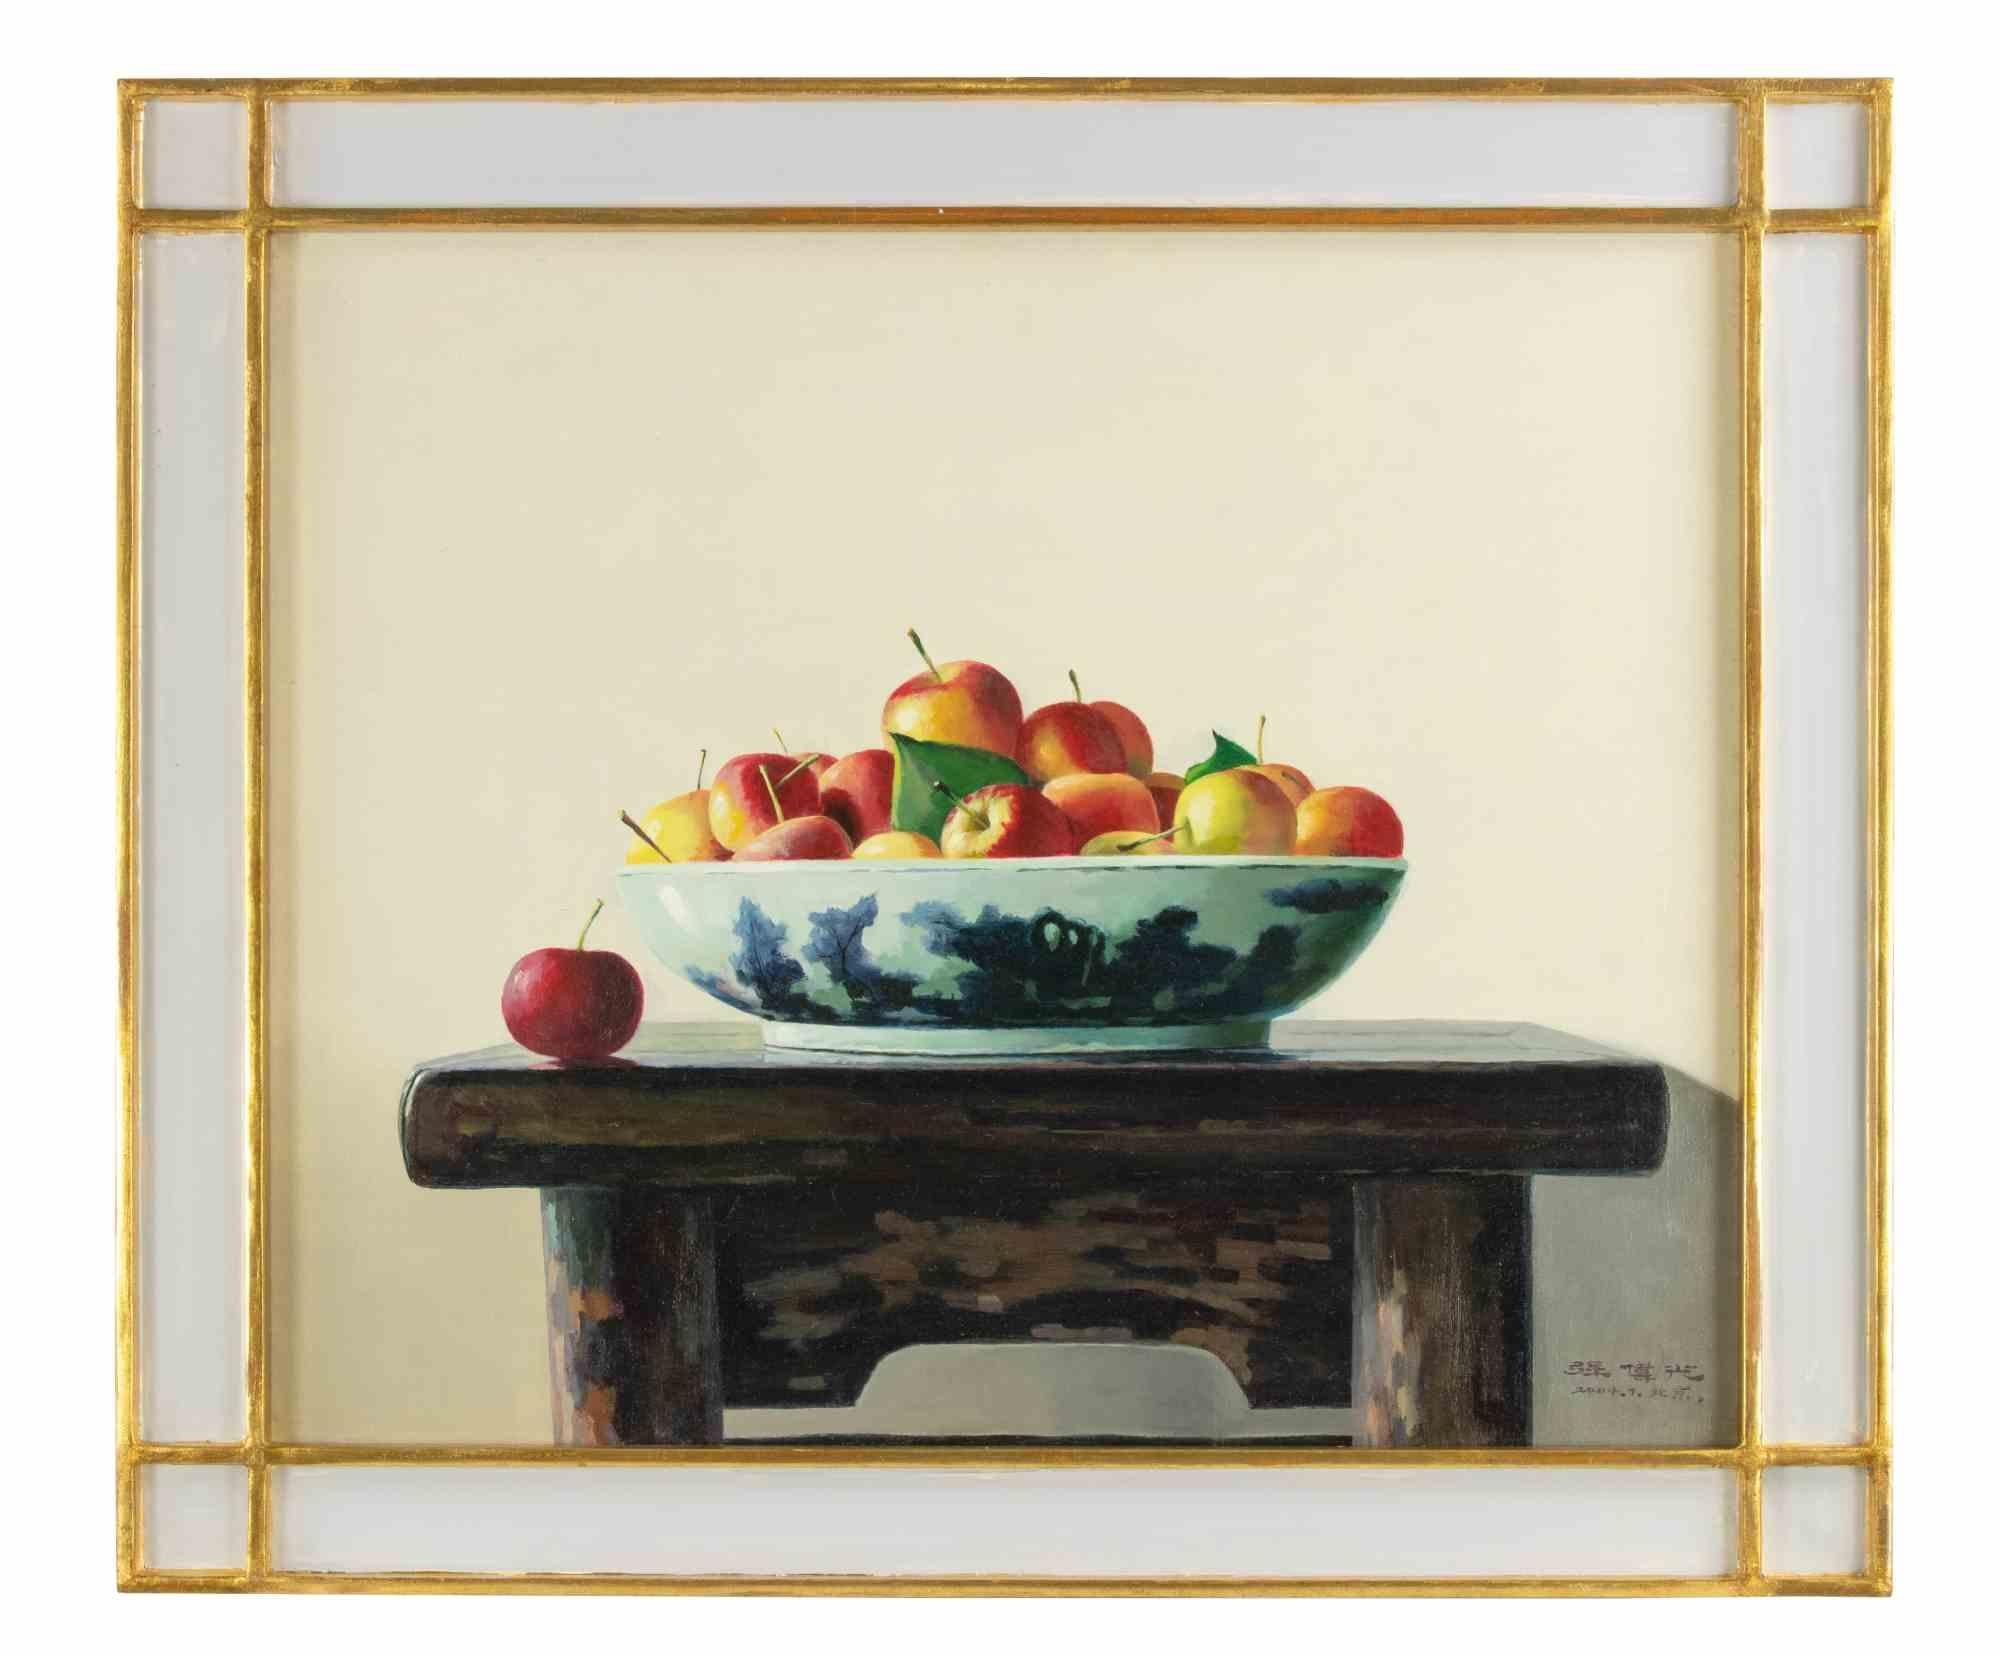 Apples on the Table is an original oil on canvas realized by the chinese painter Zhang Wei Guang (Mirror) in 2008.

Hand signed and dated on the lower margin.

Includes frame: 60 x 70.5 cm

Zhang Wei Guang, also called ‘mirror' was born in Helong